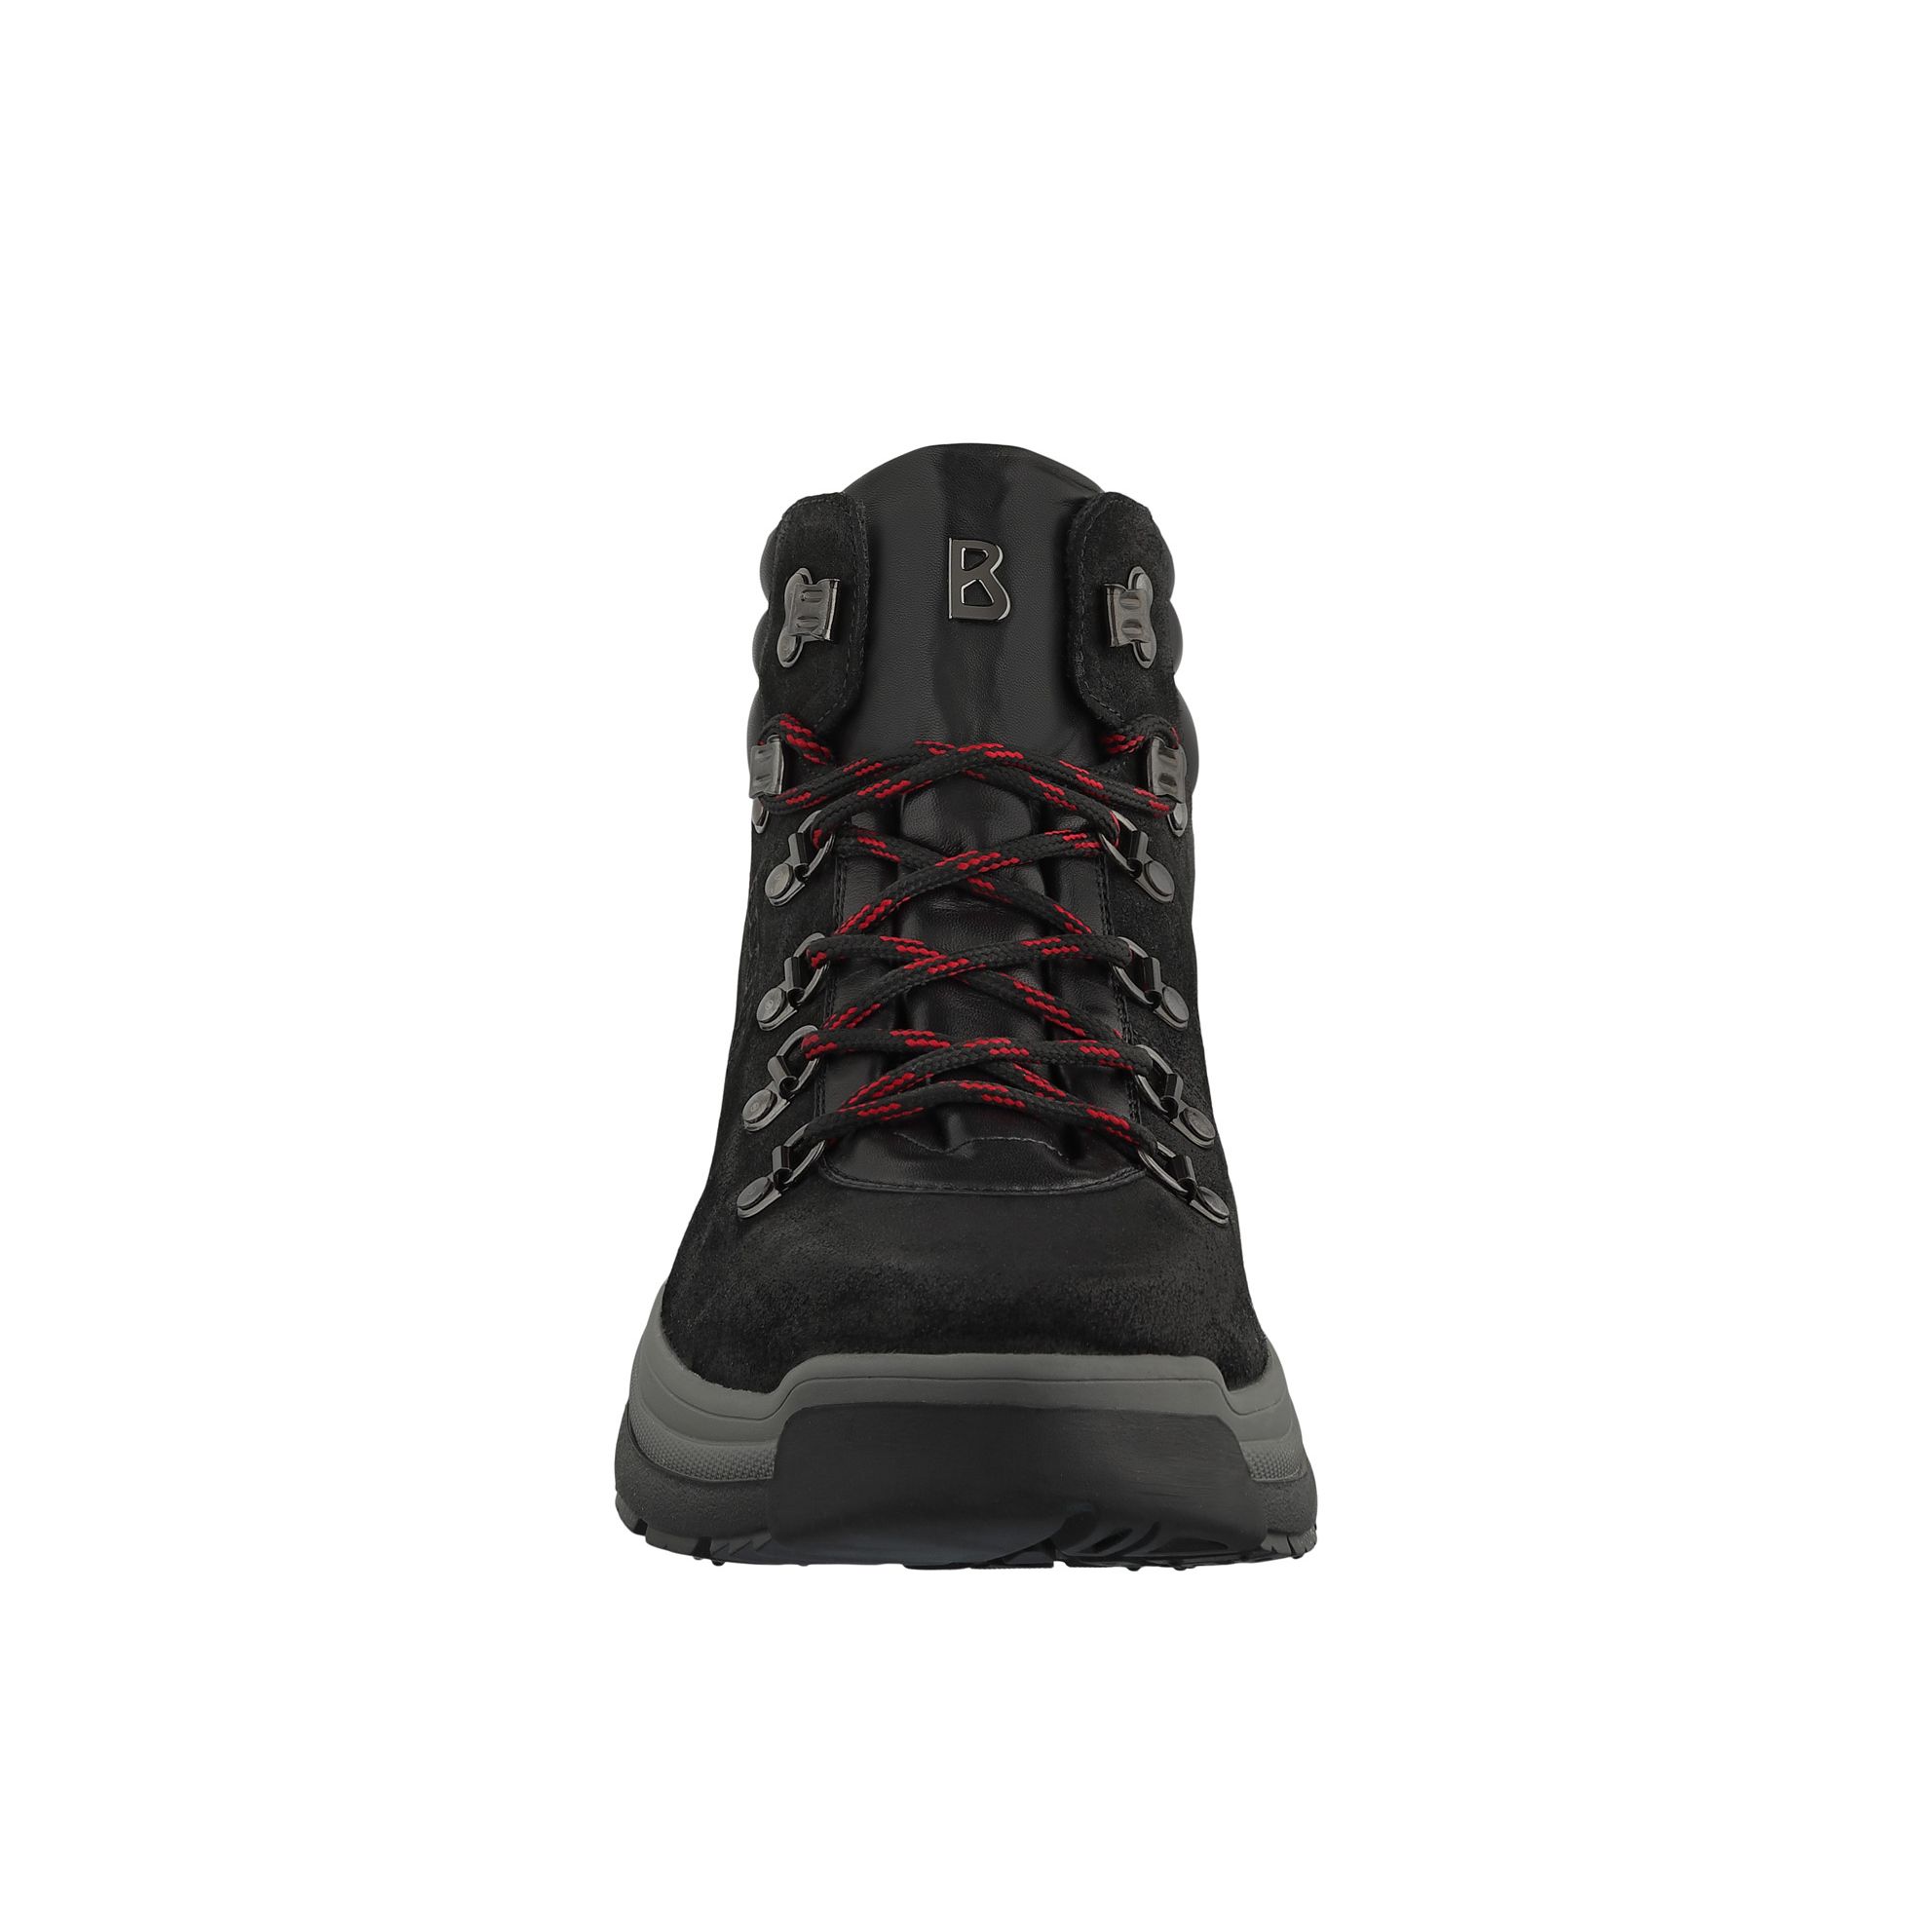 Winter Shoes -  bogner Lillehammer Lace-up boots with spikes 